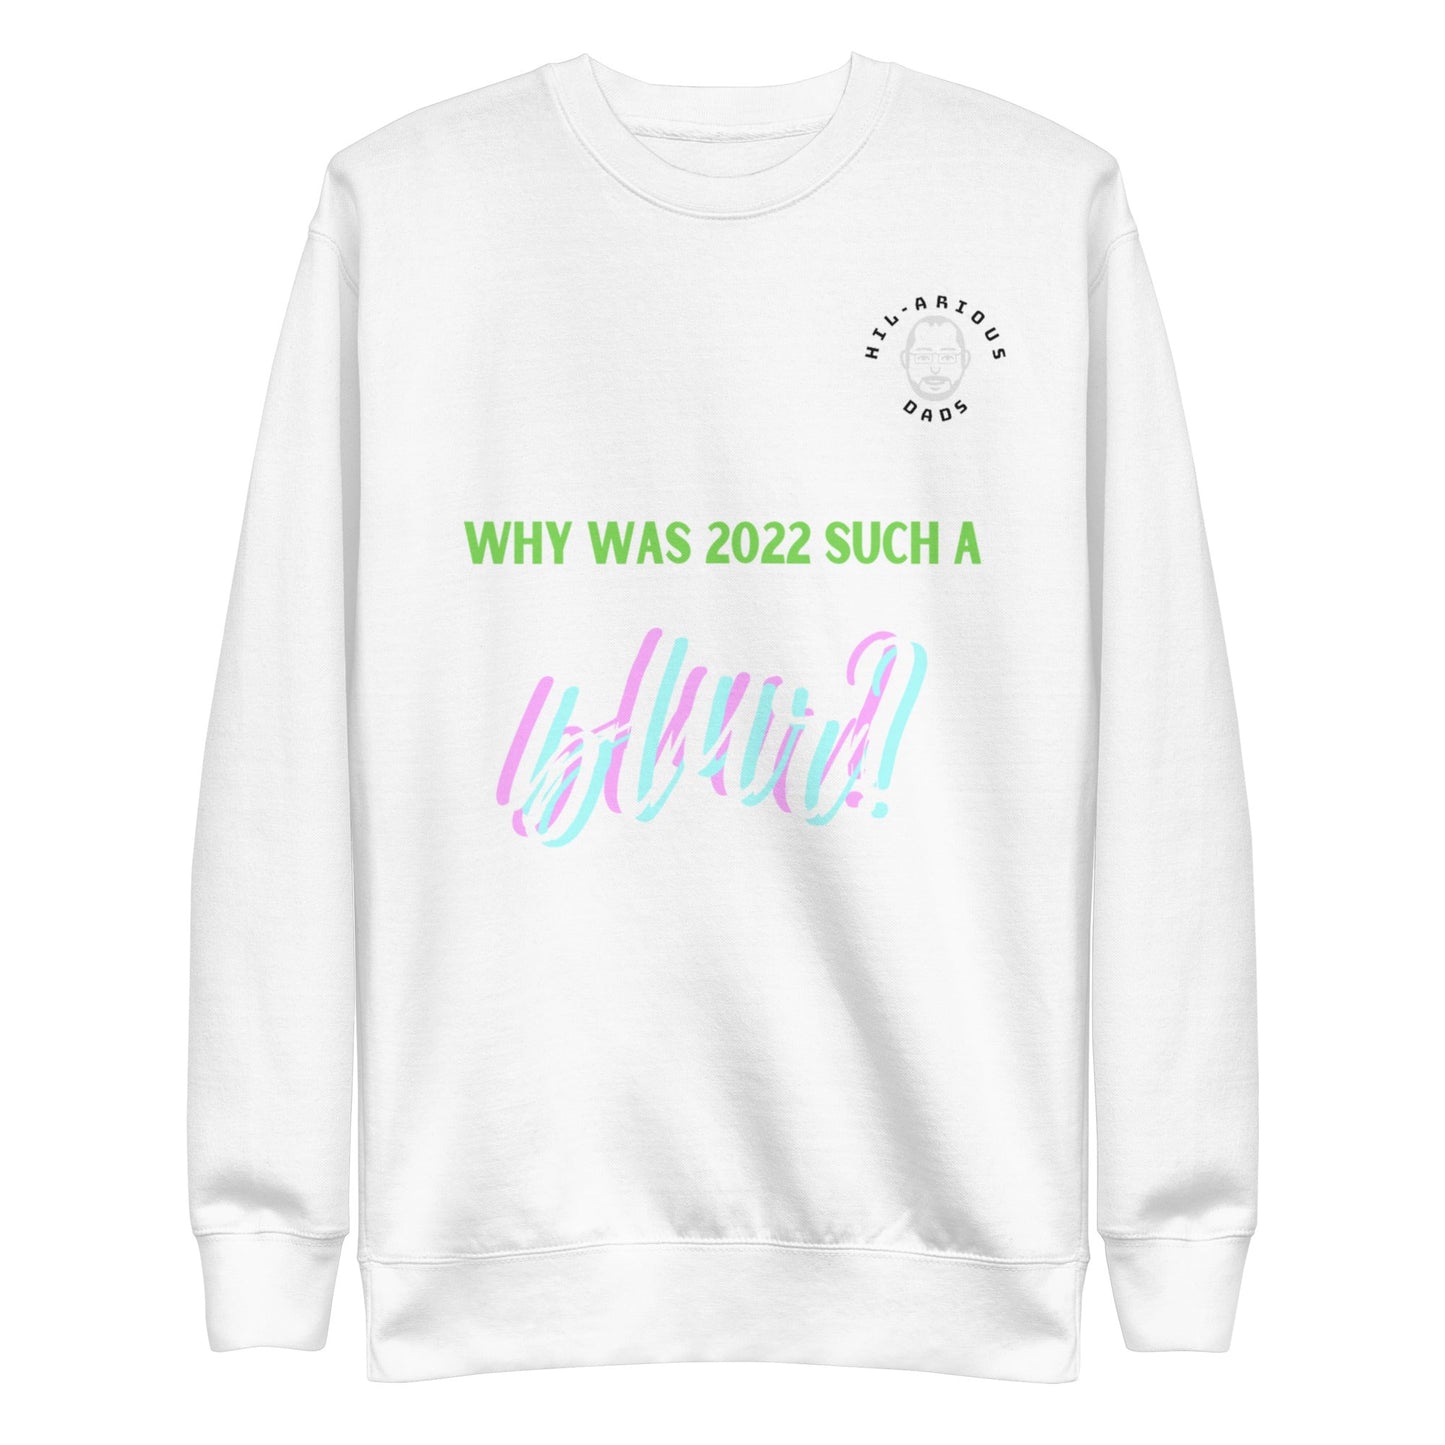 Why was 2022 such a blur?-Sweatshirt - Hil-arious Dads